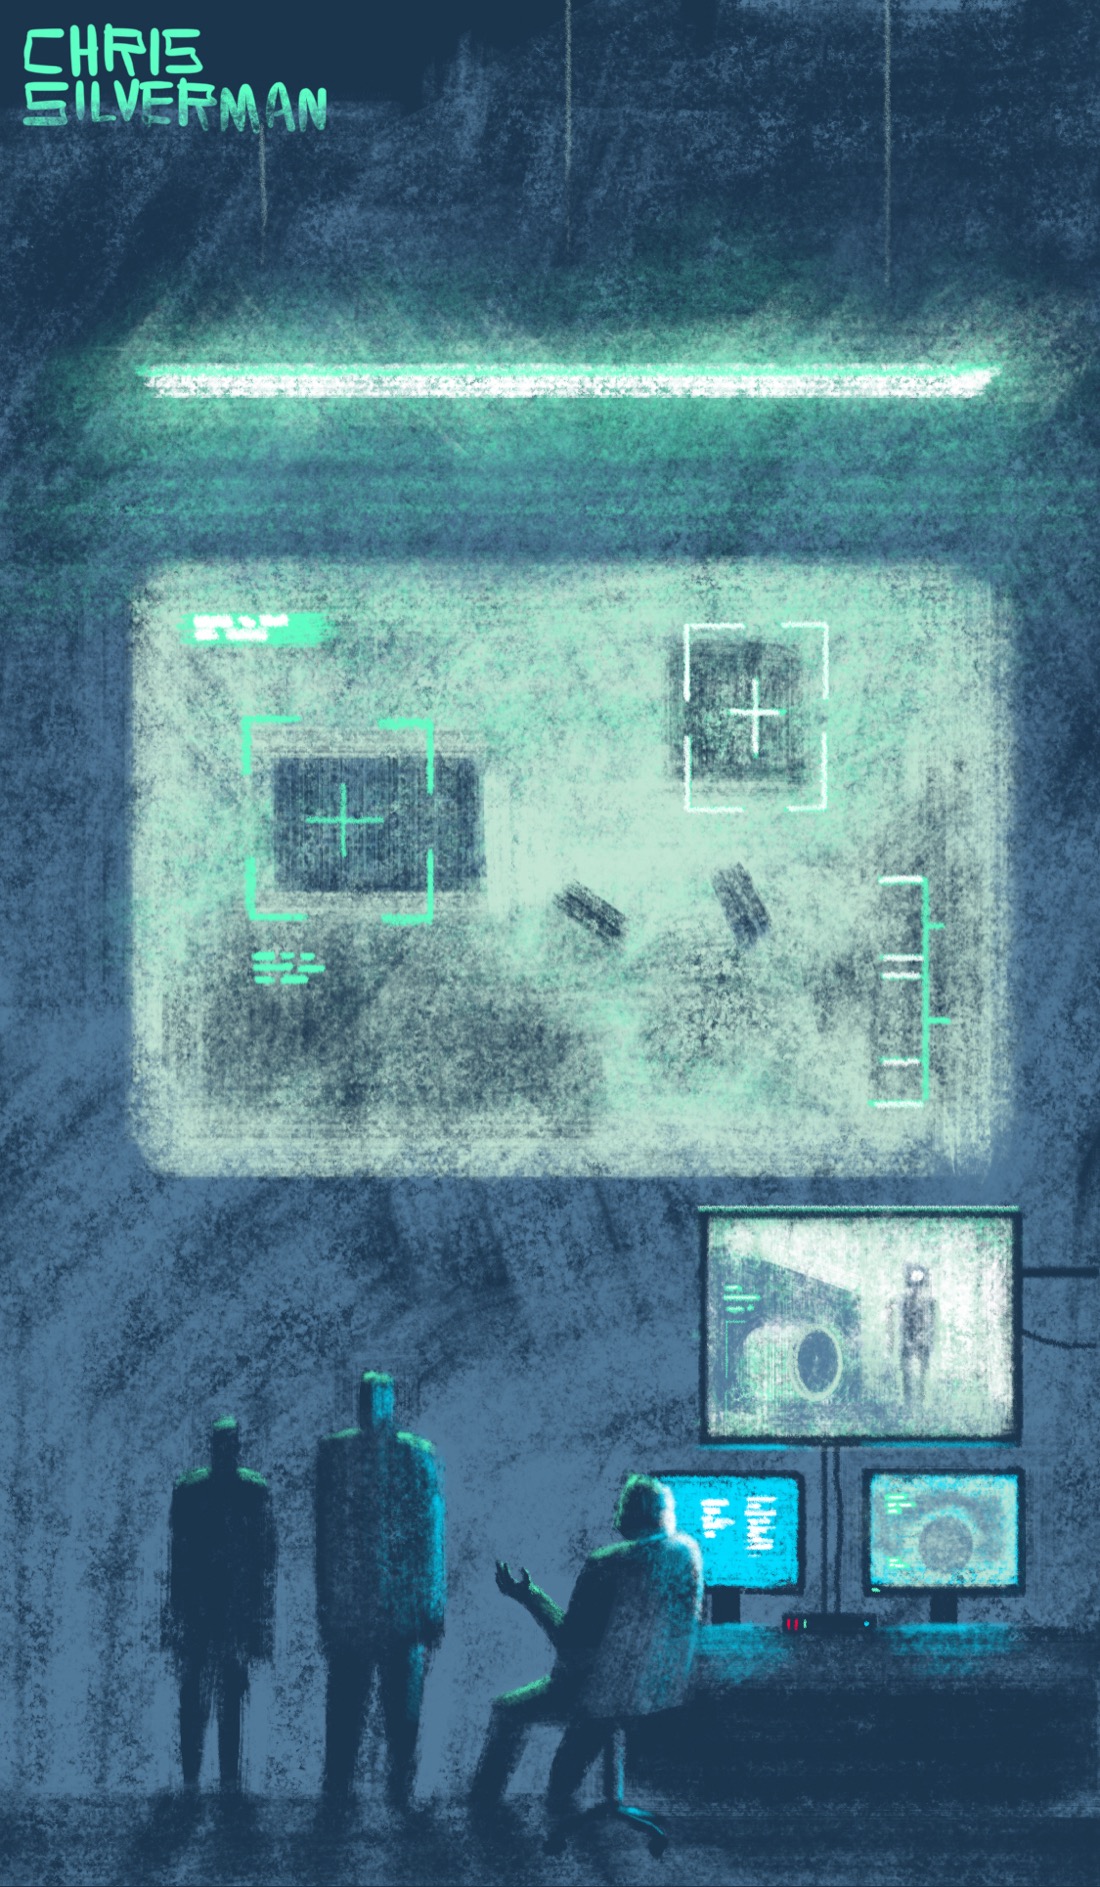 A dark, cavernous war room. Hanging from the ceiling is a long, desolate fluorescent light. Projected onto a giant wall is a dim green aerial view of something, with indecipherable information overlaid onto the image. Below it is a bank of computer screens, showing blurry images of a tunnel pipe and a robot; yesterday's drawing. Three people are looking at the screens: a short person stands at the left, a taller person stands in the middle, and on the right, a third person sits in an office chair in front of two computer screens. This is a mostly black and dark-gray drawing, with the lighted areas rendered in dull, fluorescent green and white. One of the computer screens is blue.